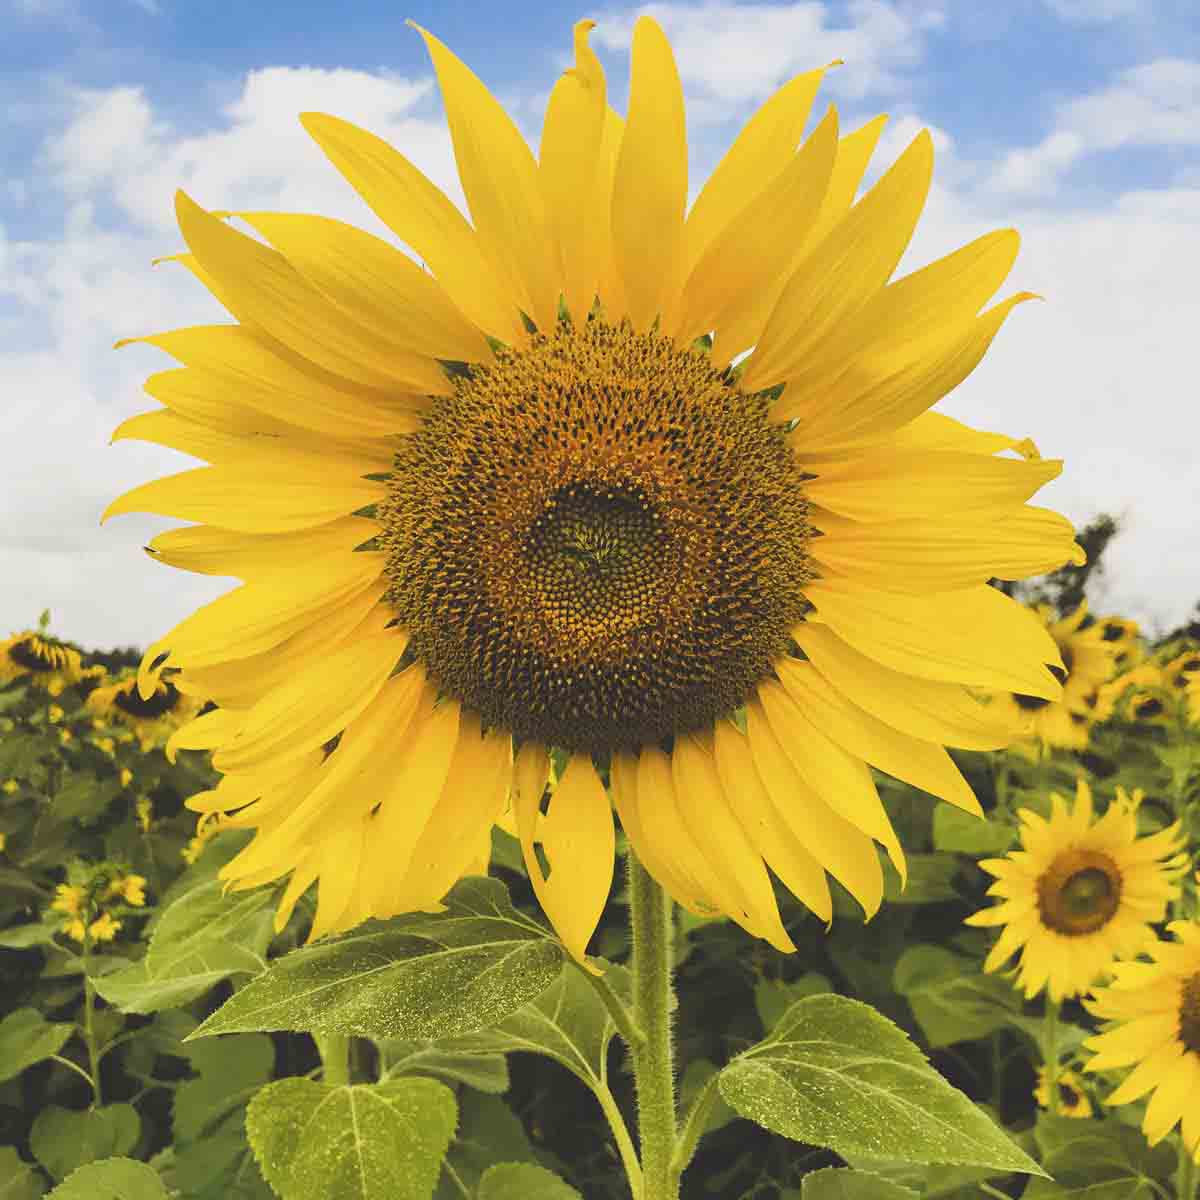 Large, bright sunflower faces the camera.